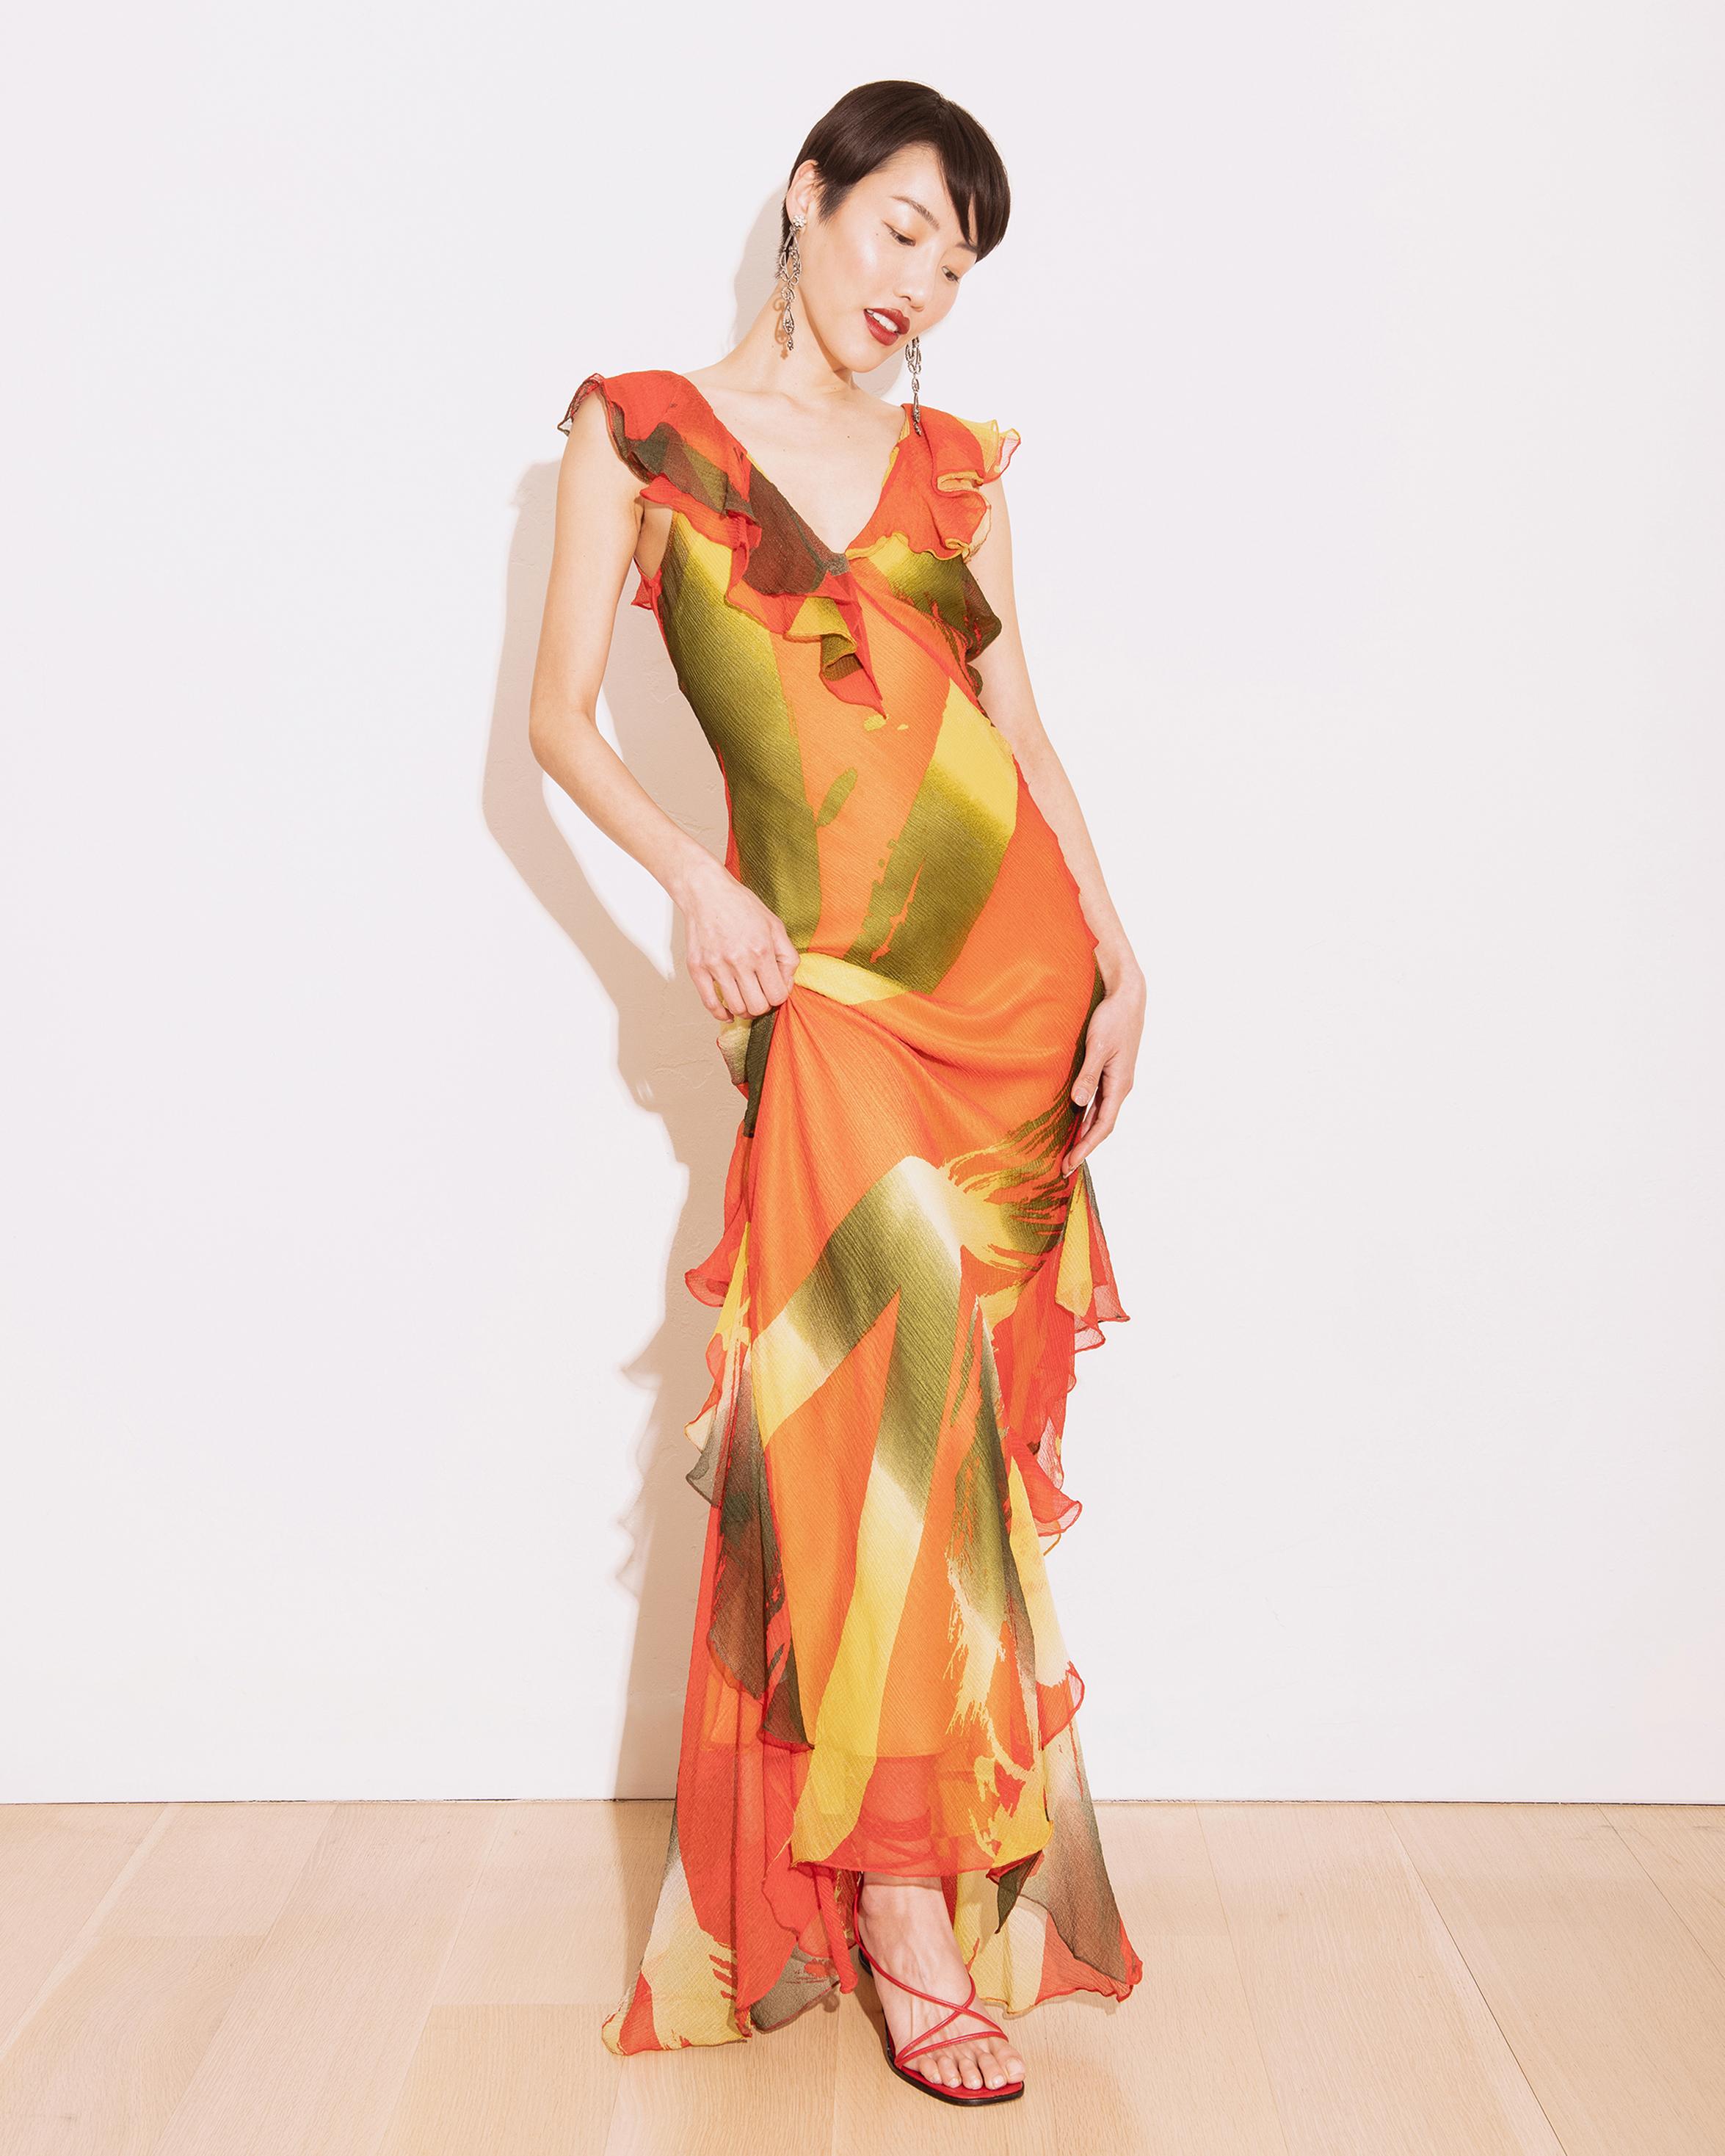 S/S 2005 Stephen Burrows Abstract Print Gown with Ruffle Details 4